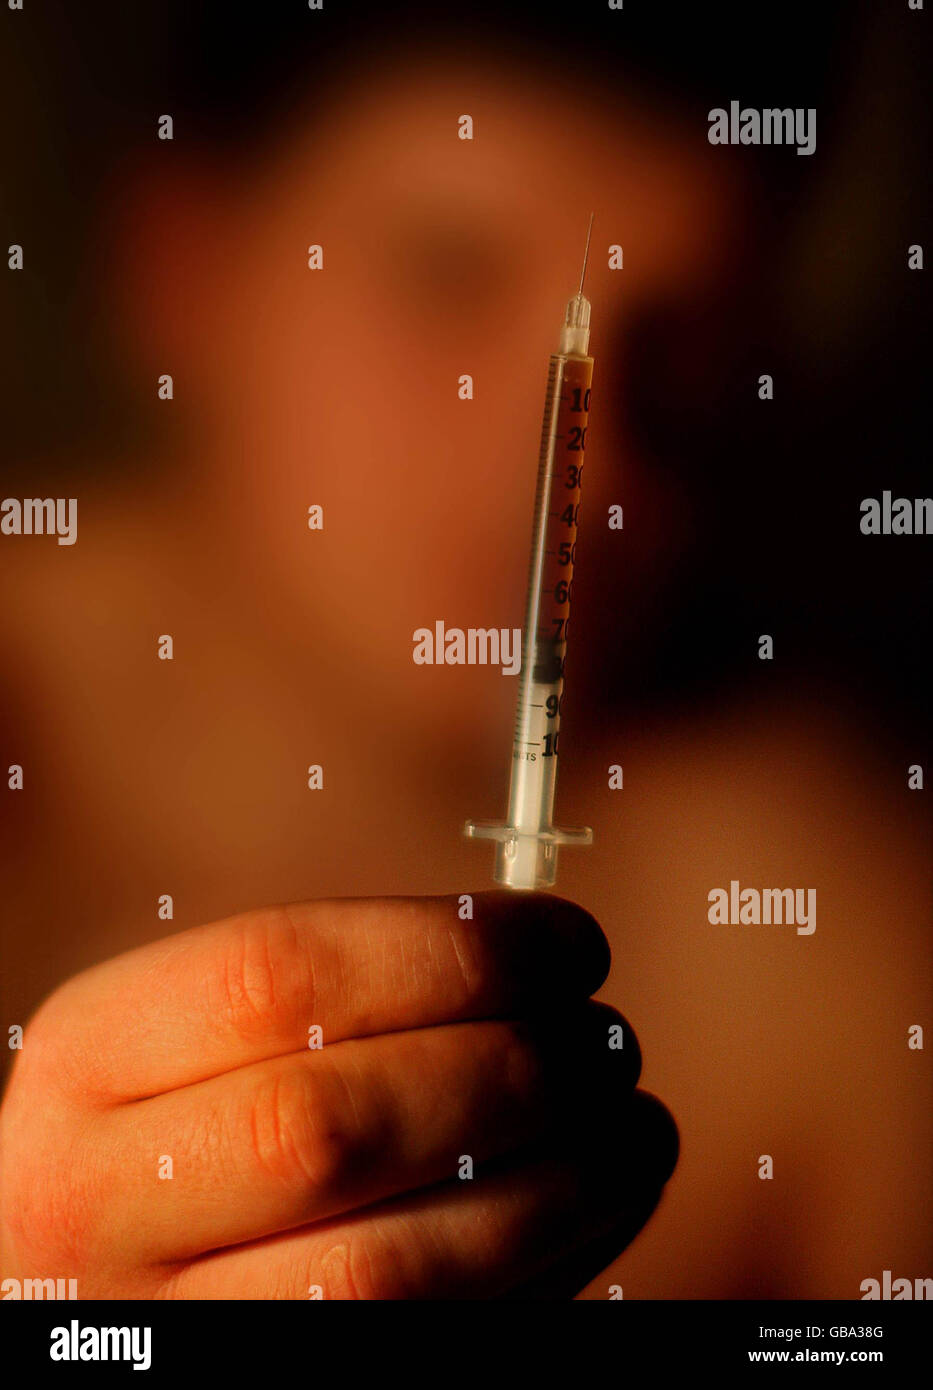 An addict holds up a needle before injecting heroin in the town of Portlaoise, Co Laois, where outreach workers believe up to 600 users could be taking heroin behind closed doors. Stock Photo